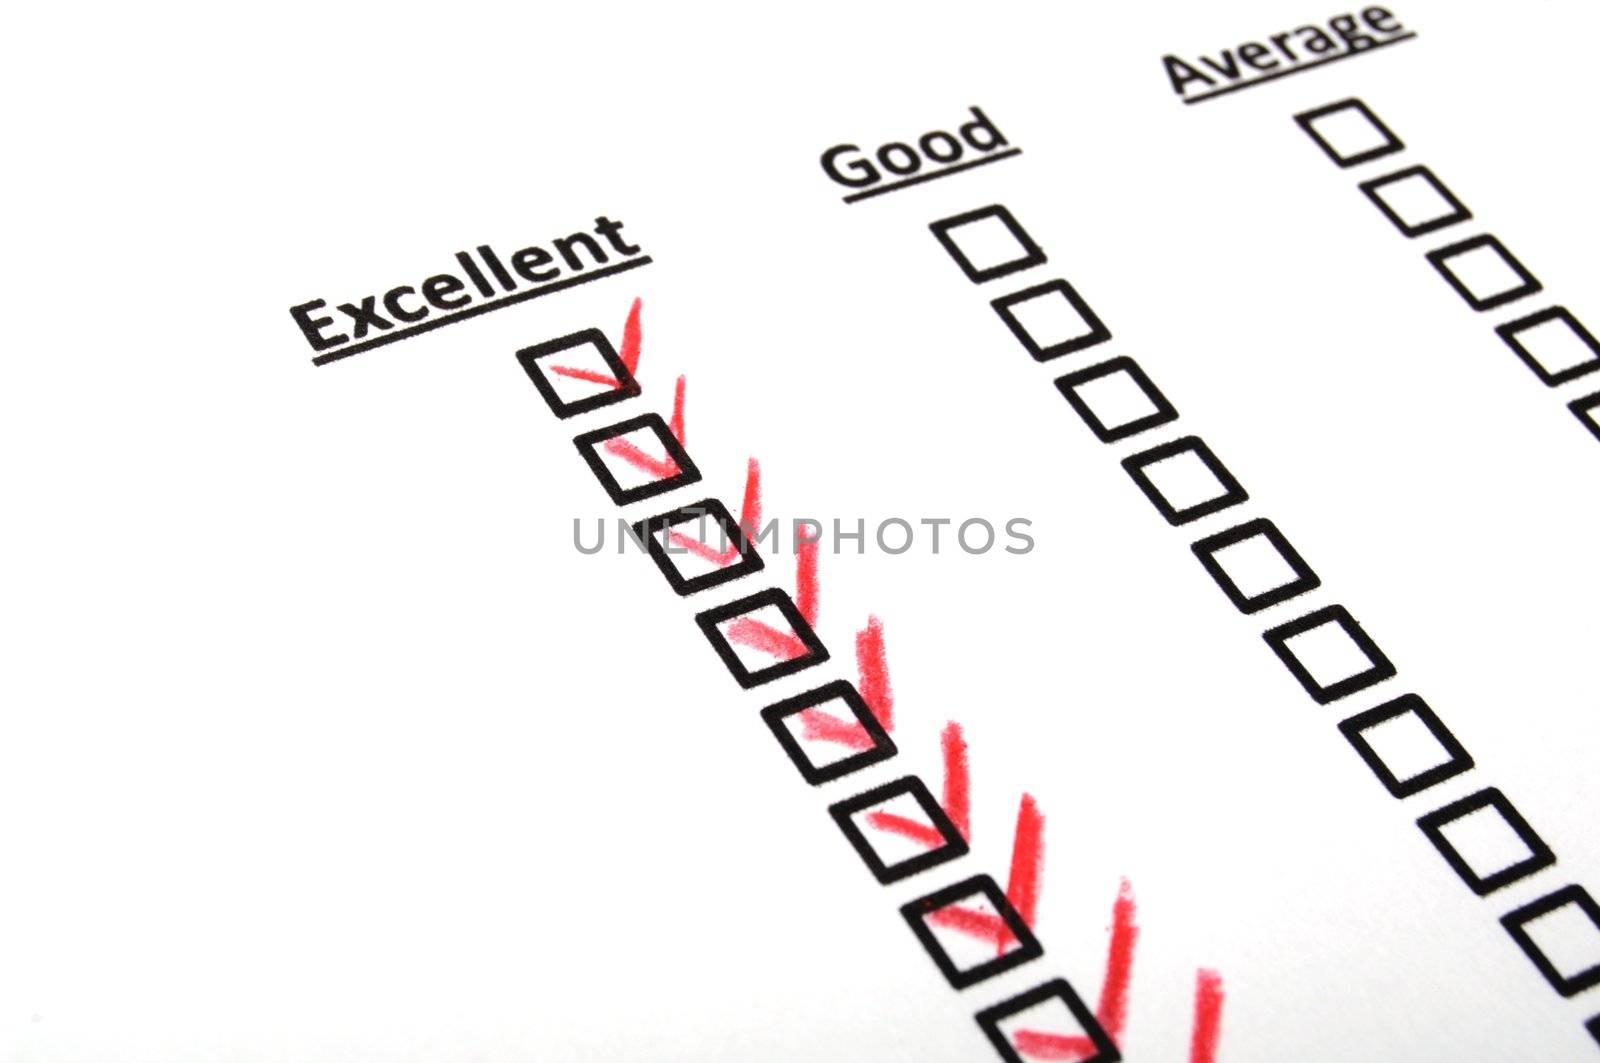 quality survey form with red pencil showing marketing concept